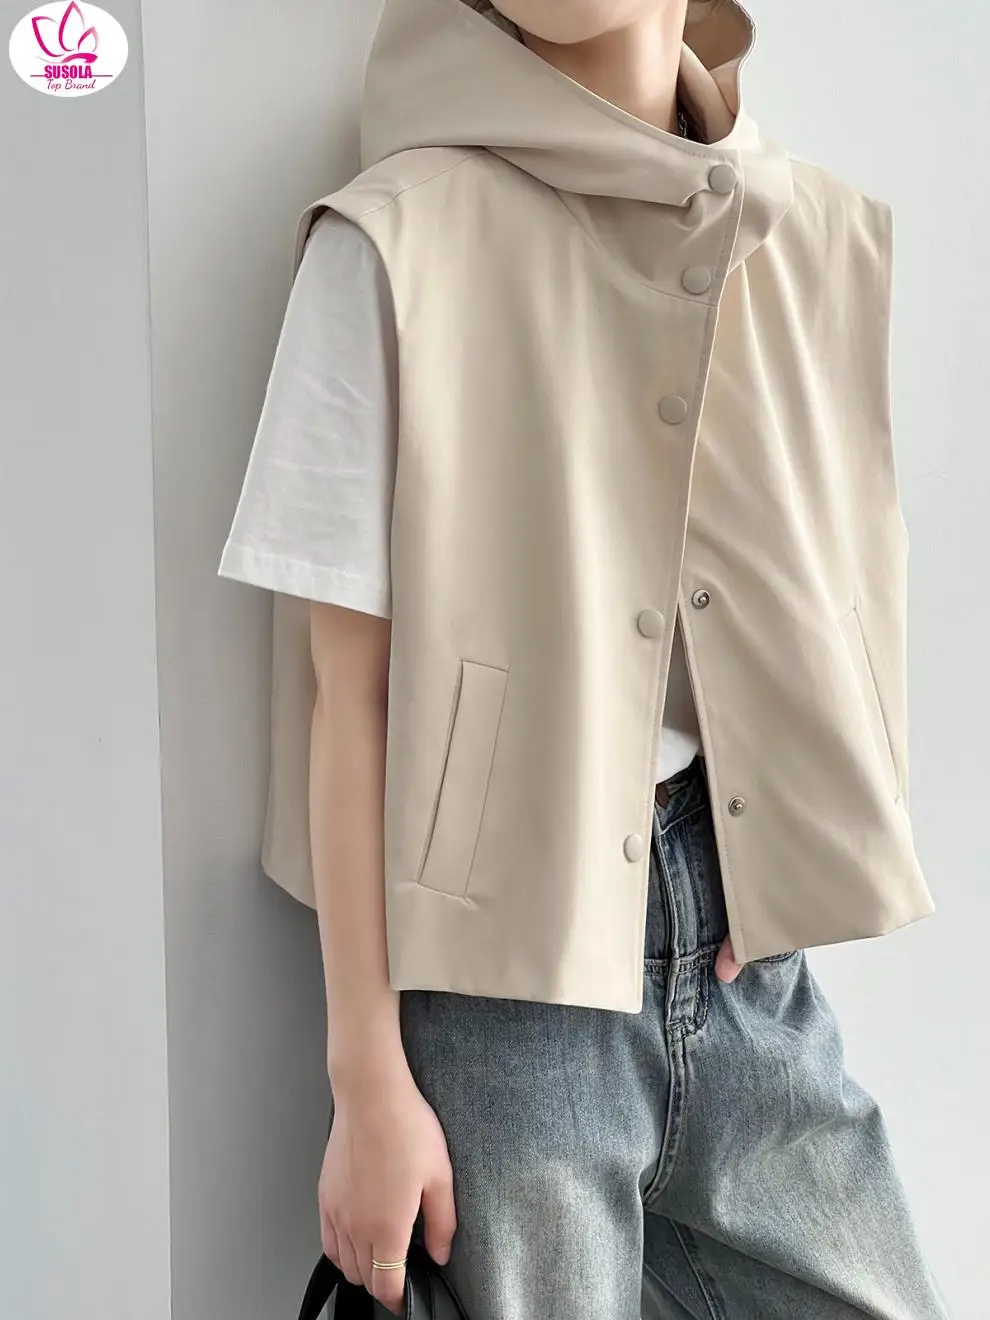 

SUSOLA Sleeveless Vests for Women Casual Hooded Top 2023 Cardigan Korean Version of The Shoulders Section Sleeveless Jacket